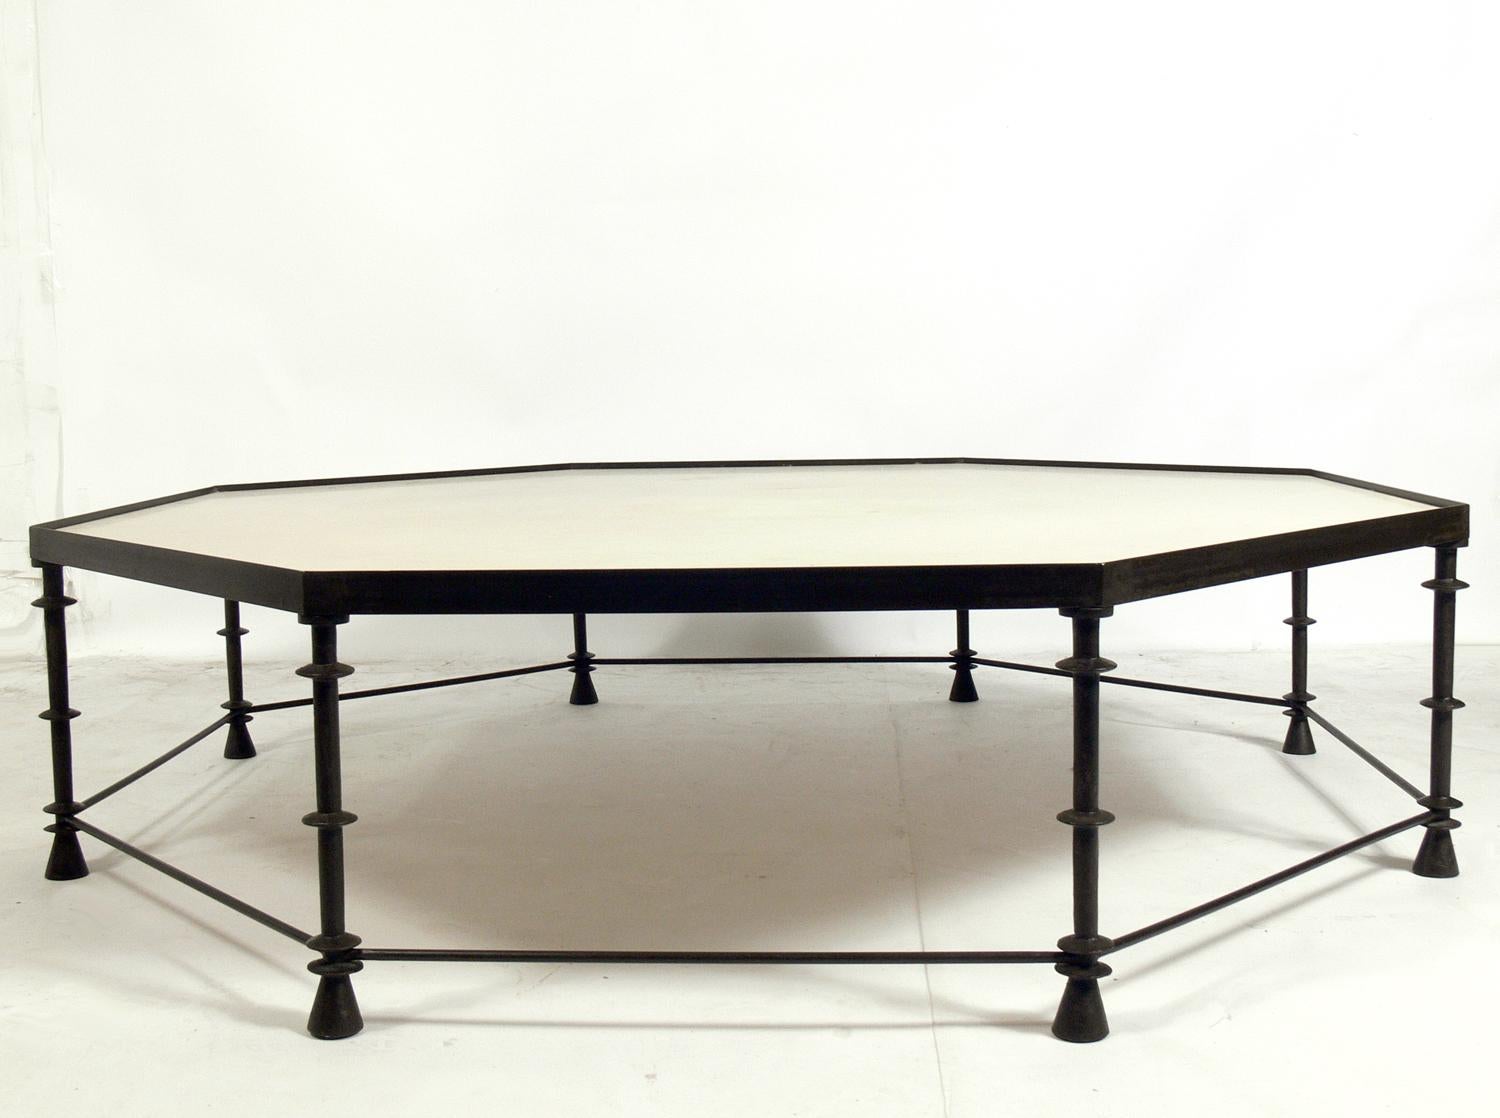 Monumental scale coffee table, in the style of Diego Giacometti, circa 1990s. This piece was custom made and is constructed of a bronze color finished metal with an inset ivory color travertine top. It measures an impressive 5 foot diameter.